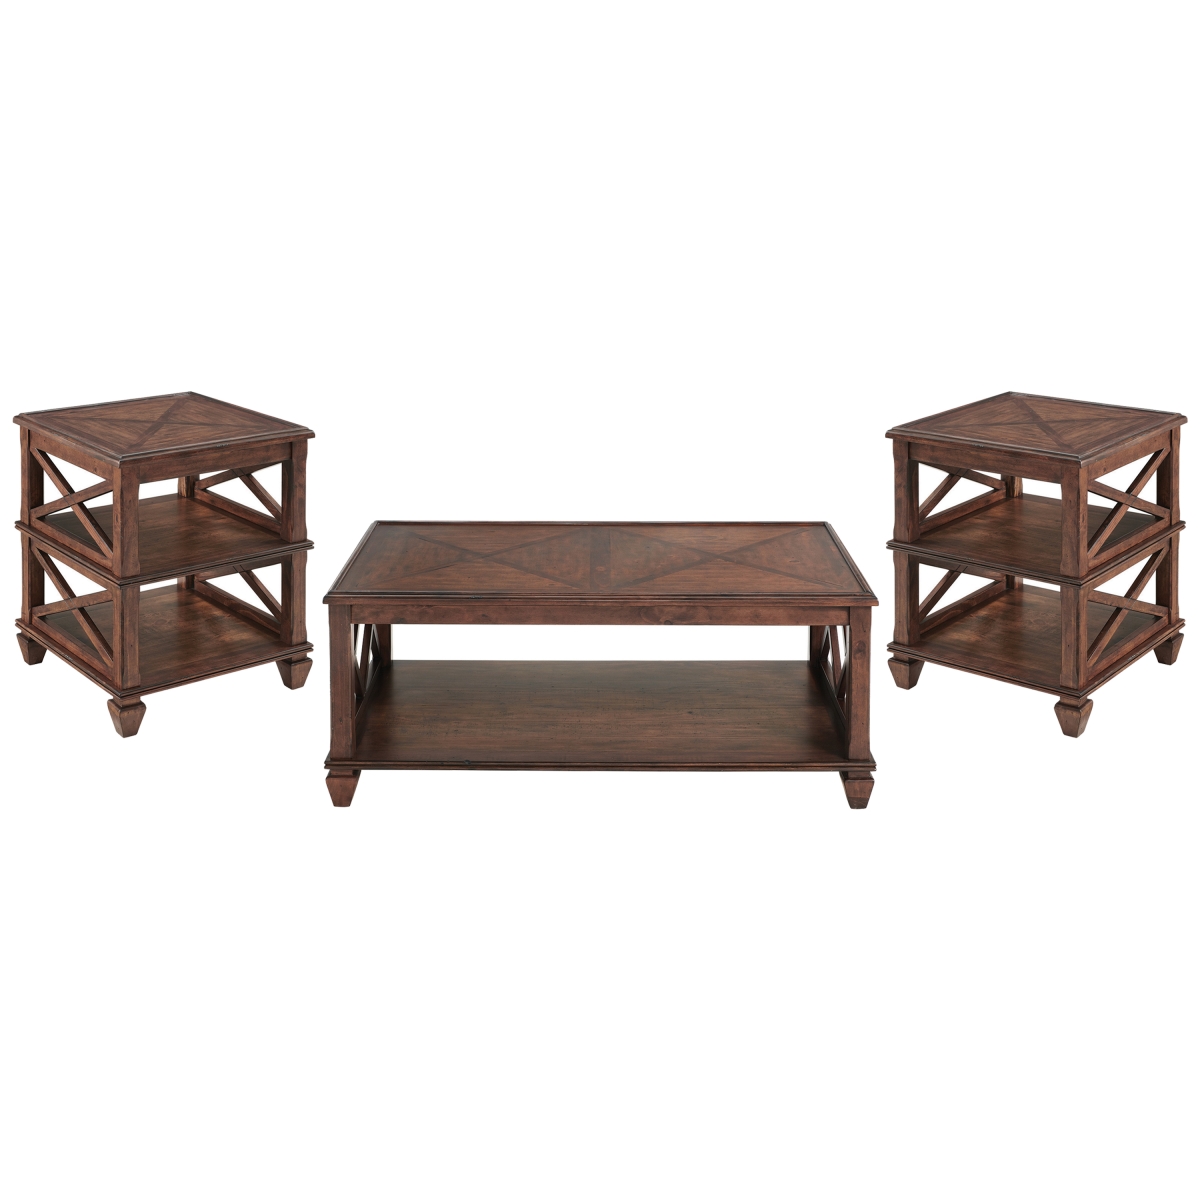 Picture of Alaterre ANSB0221162 45 in. Stockbridge Wood Living Room Set with Coffee & Two 2 -Shelf End Tables - 3 Piece